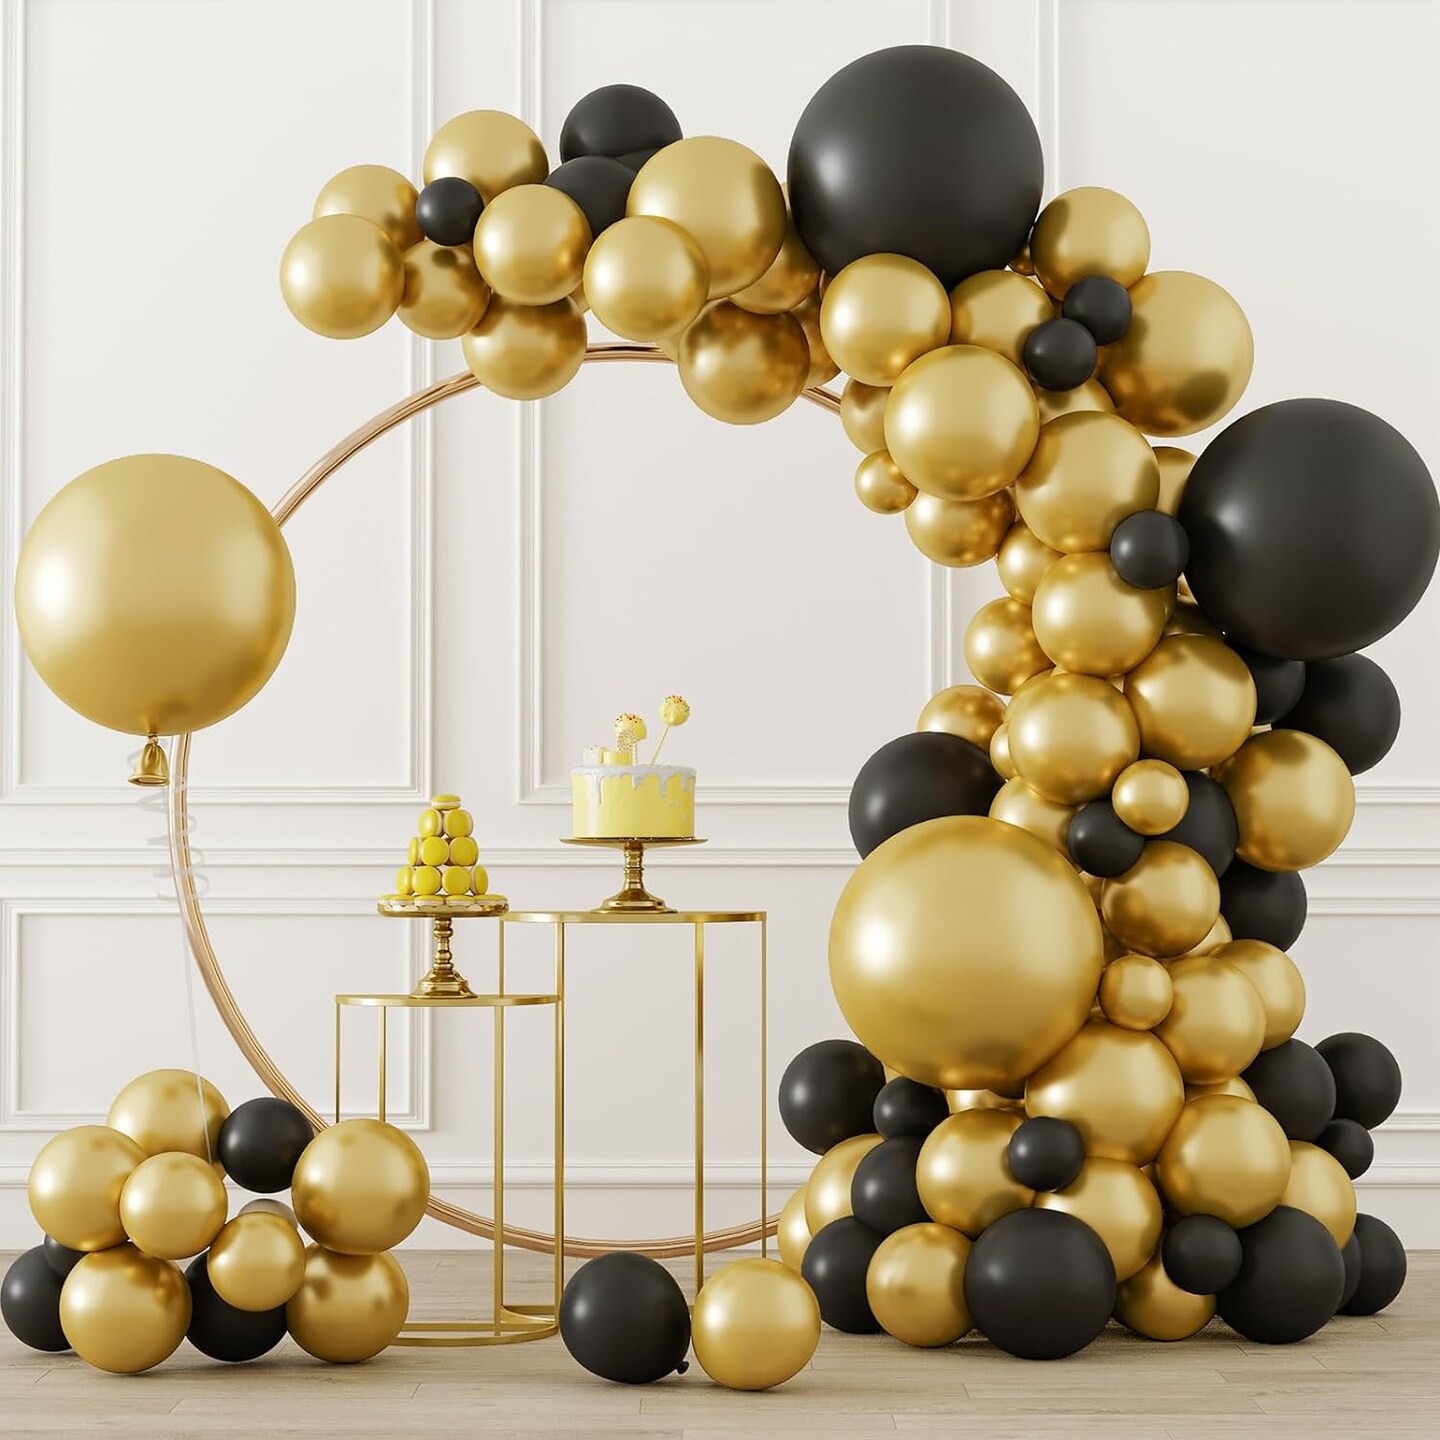 Black and Gold Balloons Arch Garland Kit, 18/12/5 Inch Latex Balloon Set for Birthday Party Wedding Graduation Anniversary Baby Shower